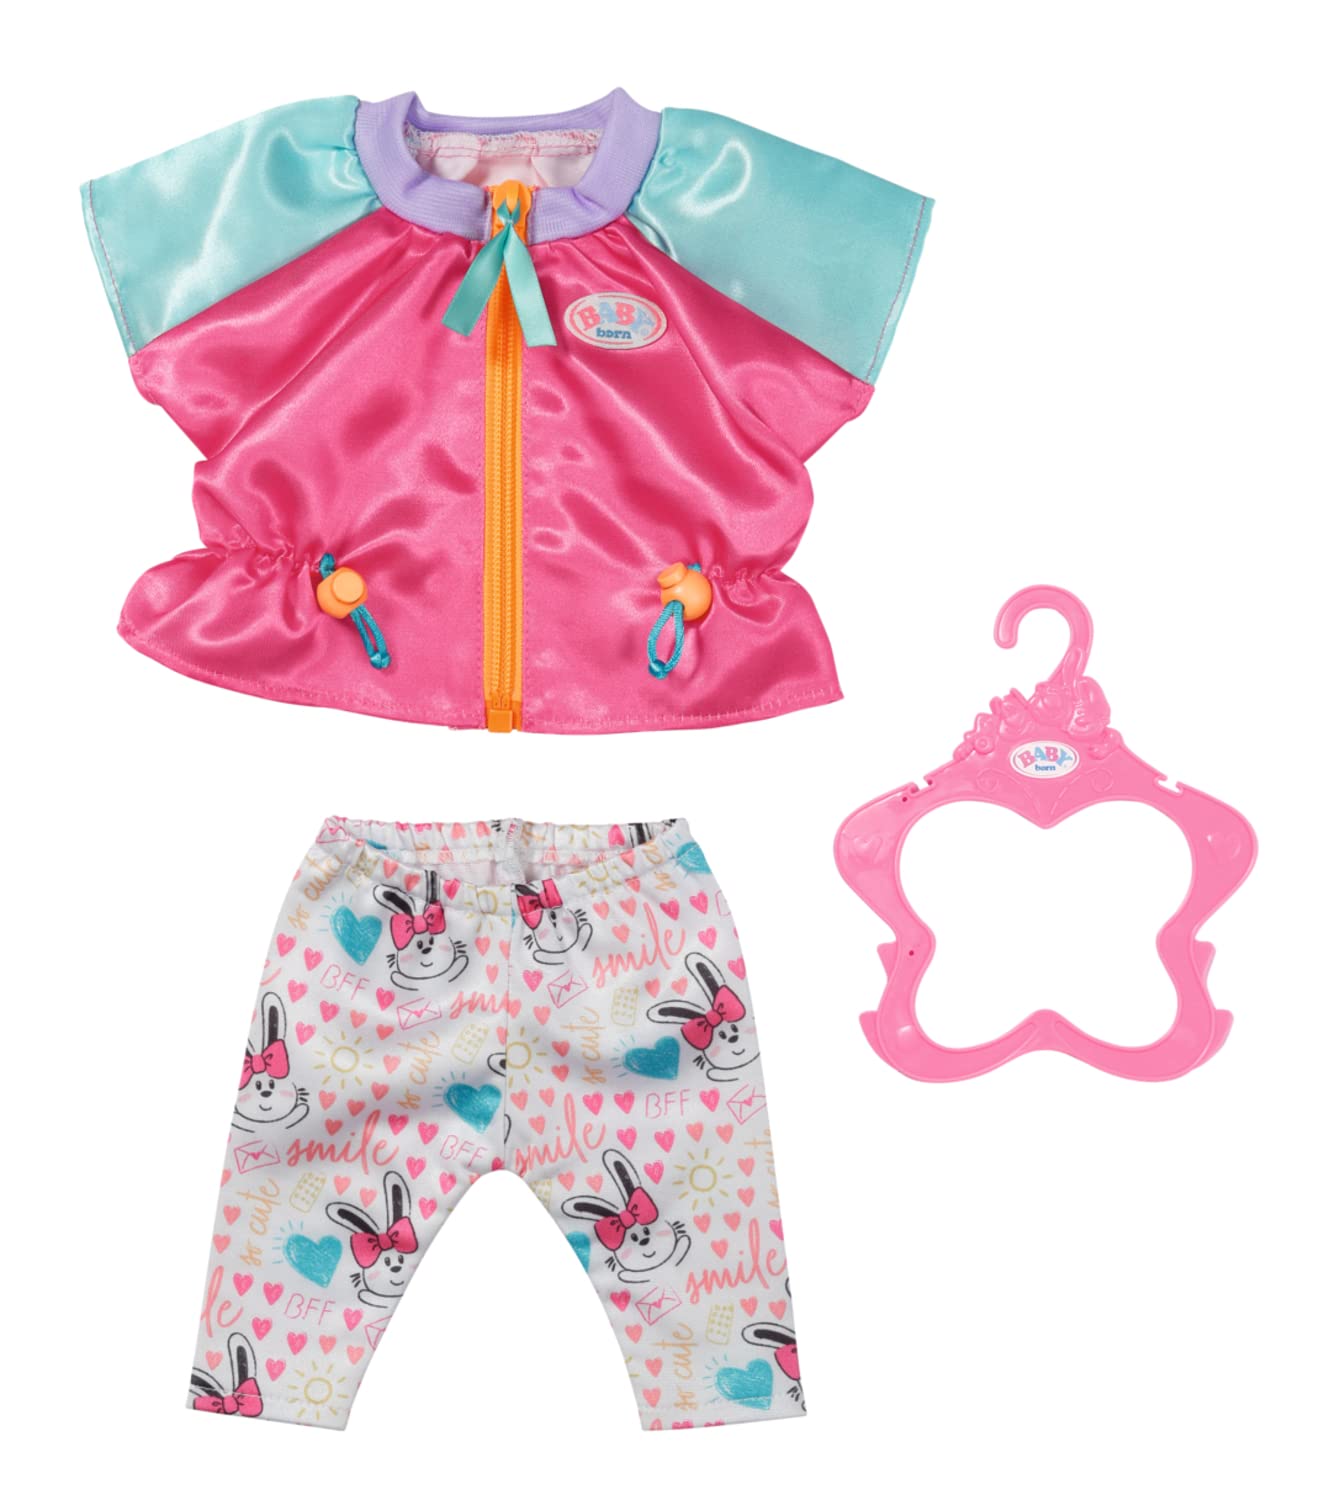 BABY Born Casual Outfit Pink 833605 Clothing for 43cm Dolls for Toddlers - Includes Jacket, Trousers & Clothing Hanger - Suitable from 3 Years